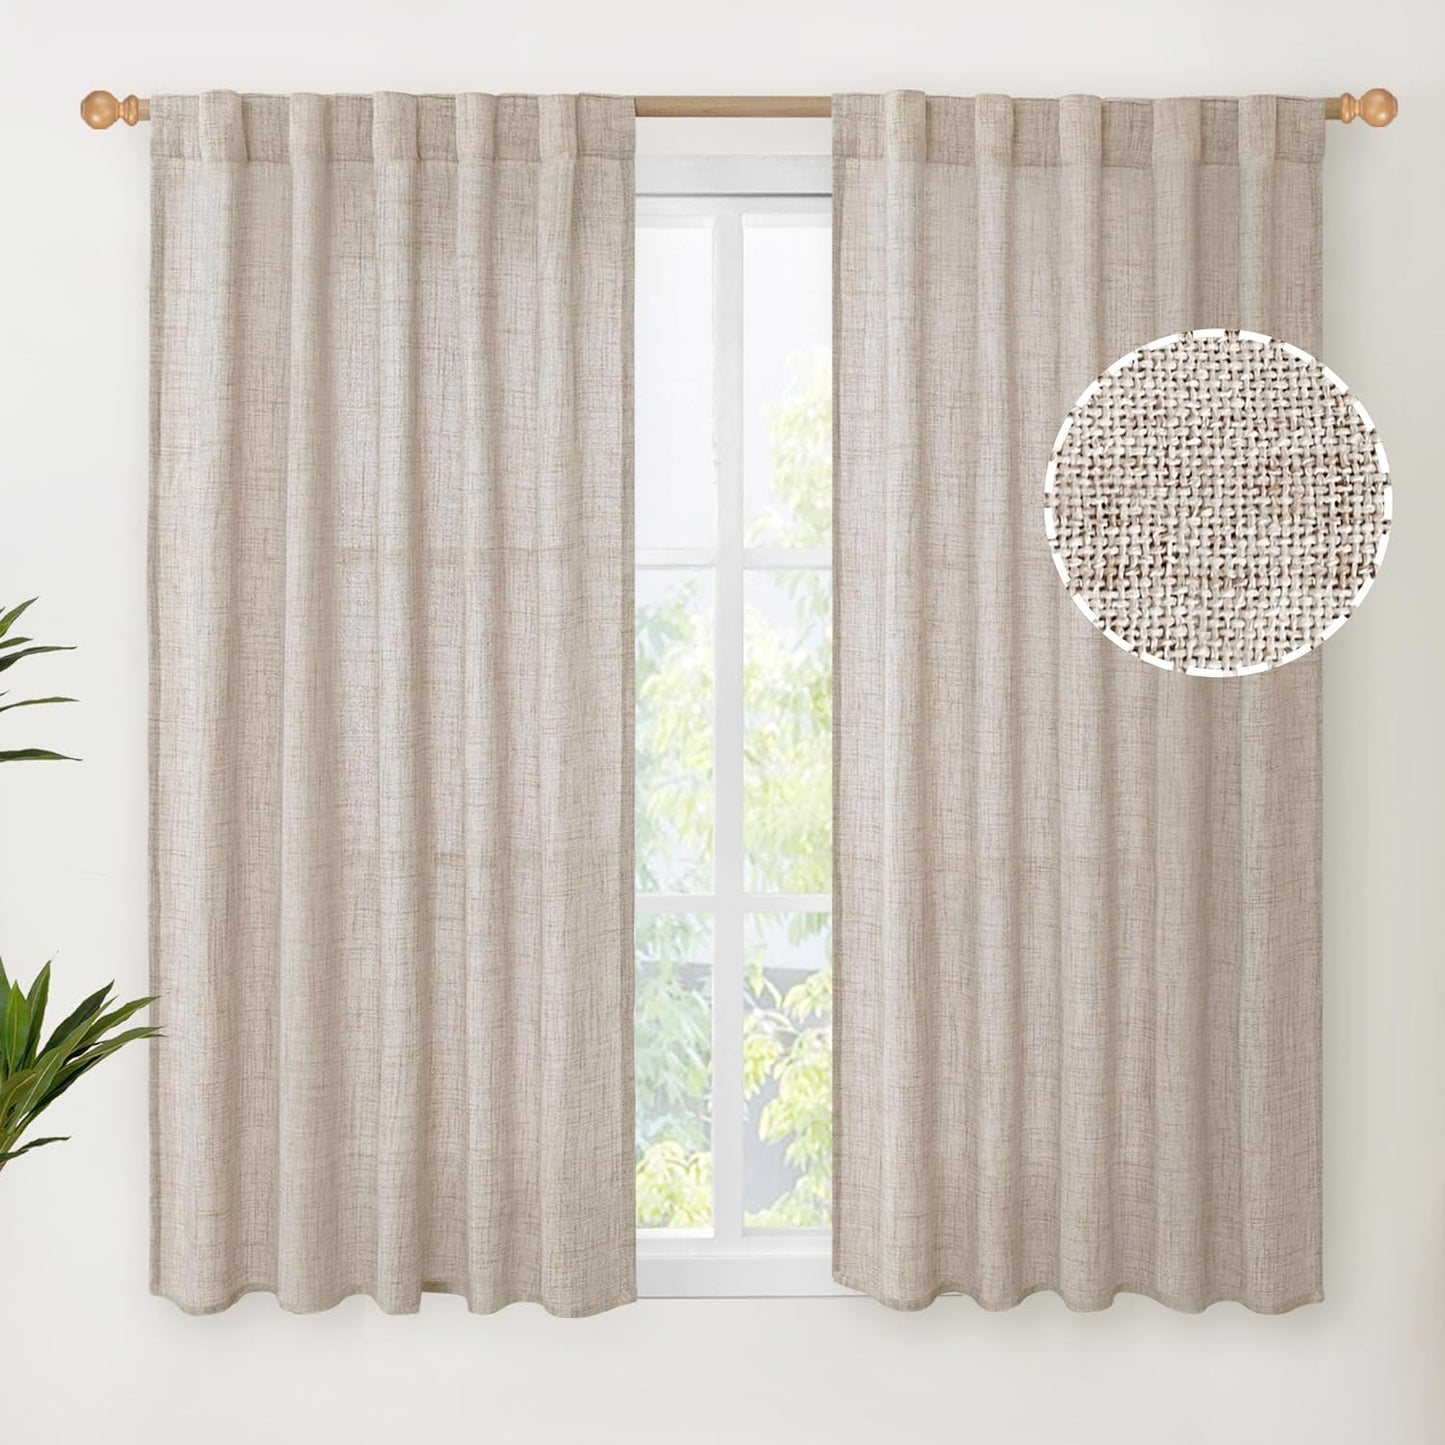 Youngstex Natural Linen Curtains 72 Inch Length 2 Panels for Living Room Light Filtering Textured Window Drapes for Bedroom Dining Office Back Tab Rod Pocket, 52 X 72 Inch  YoungsTex Natural 42W X 40L 